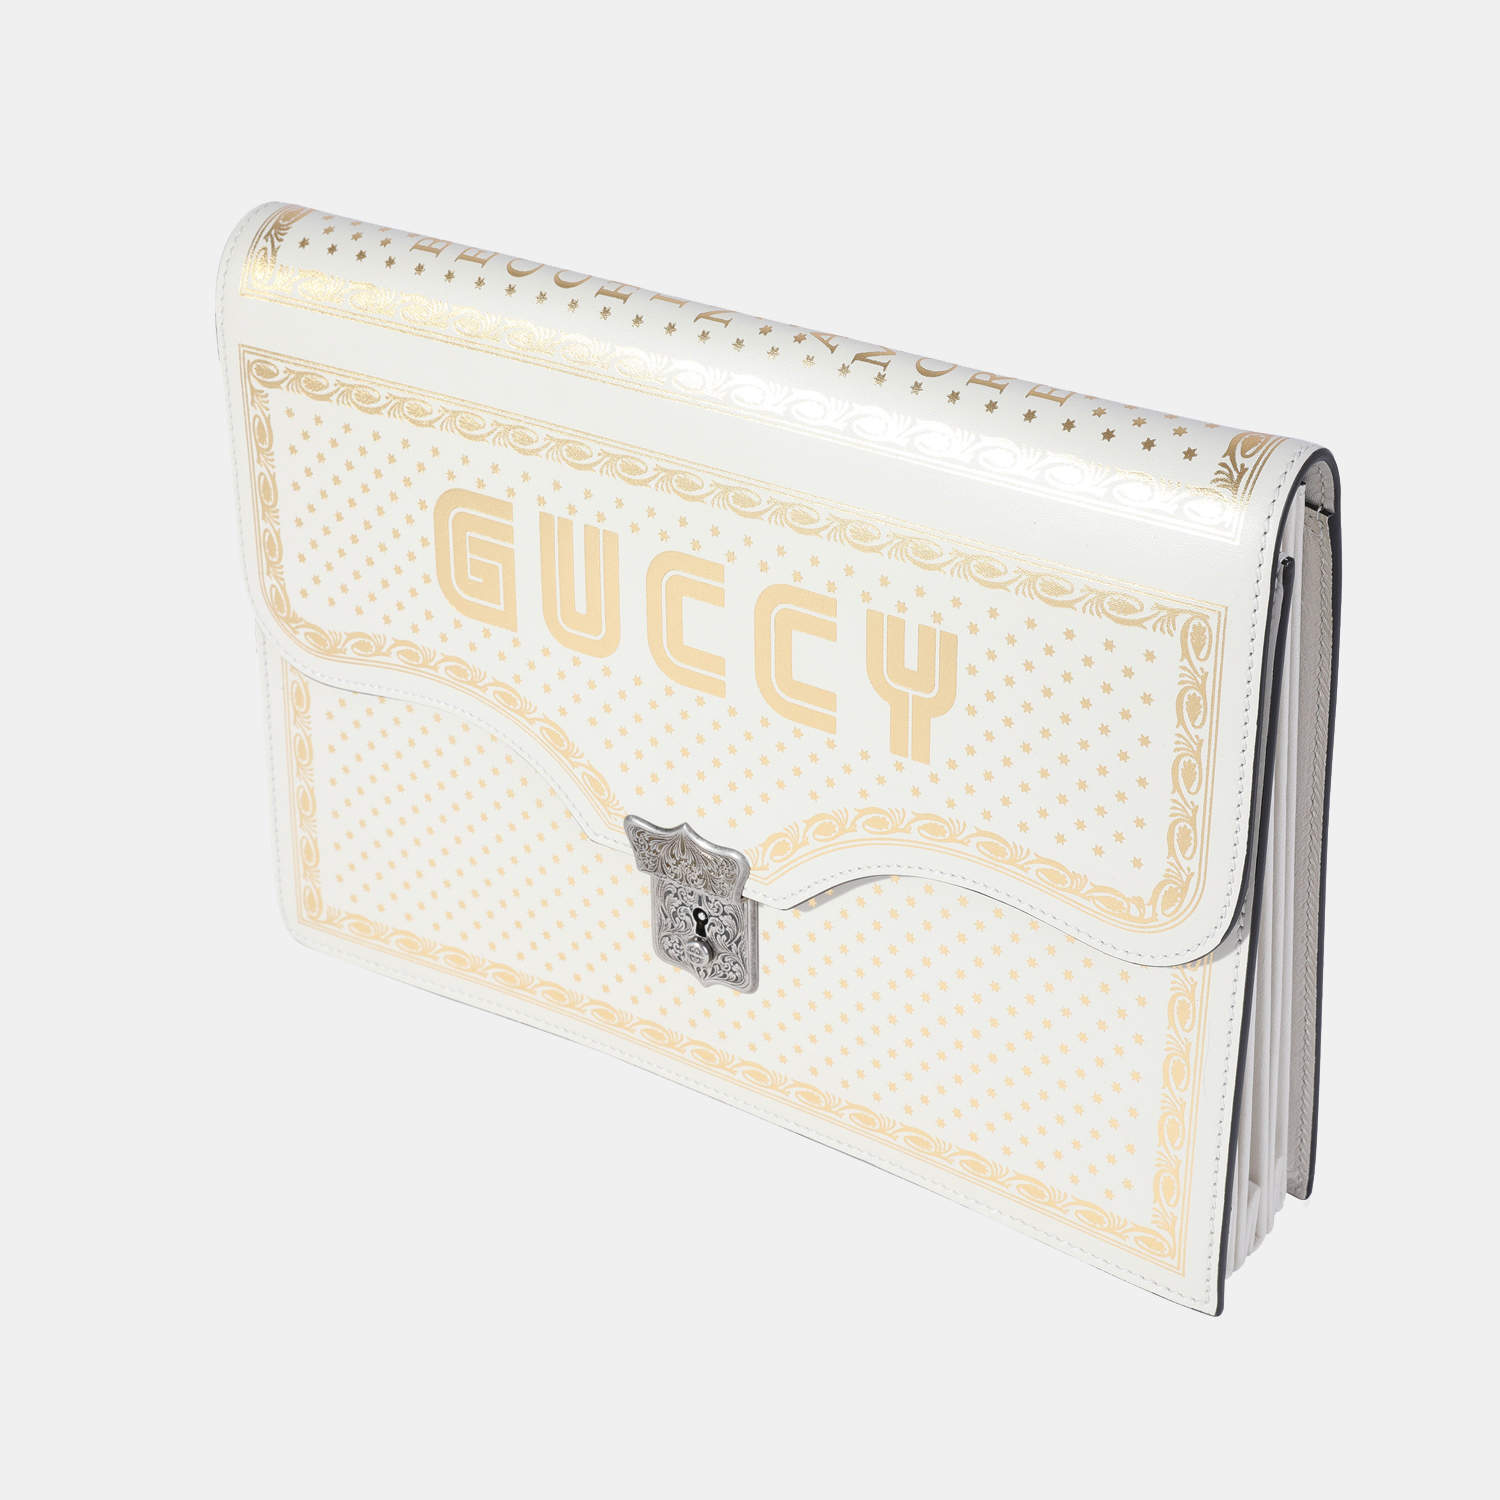 Clutch bag with logo by Gucci